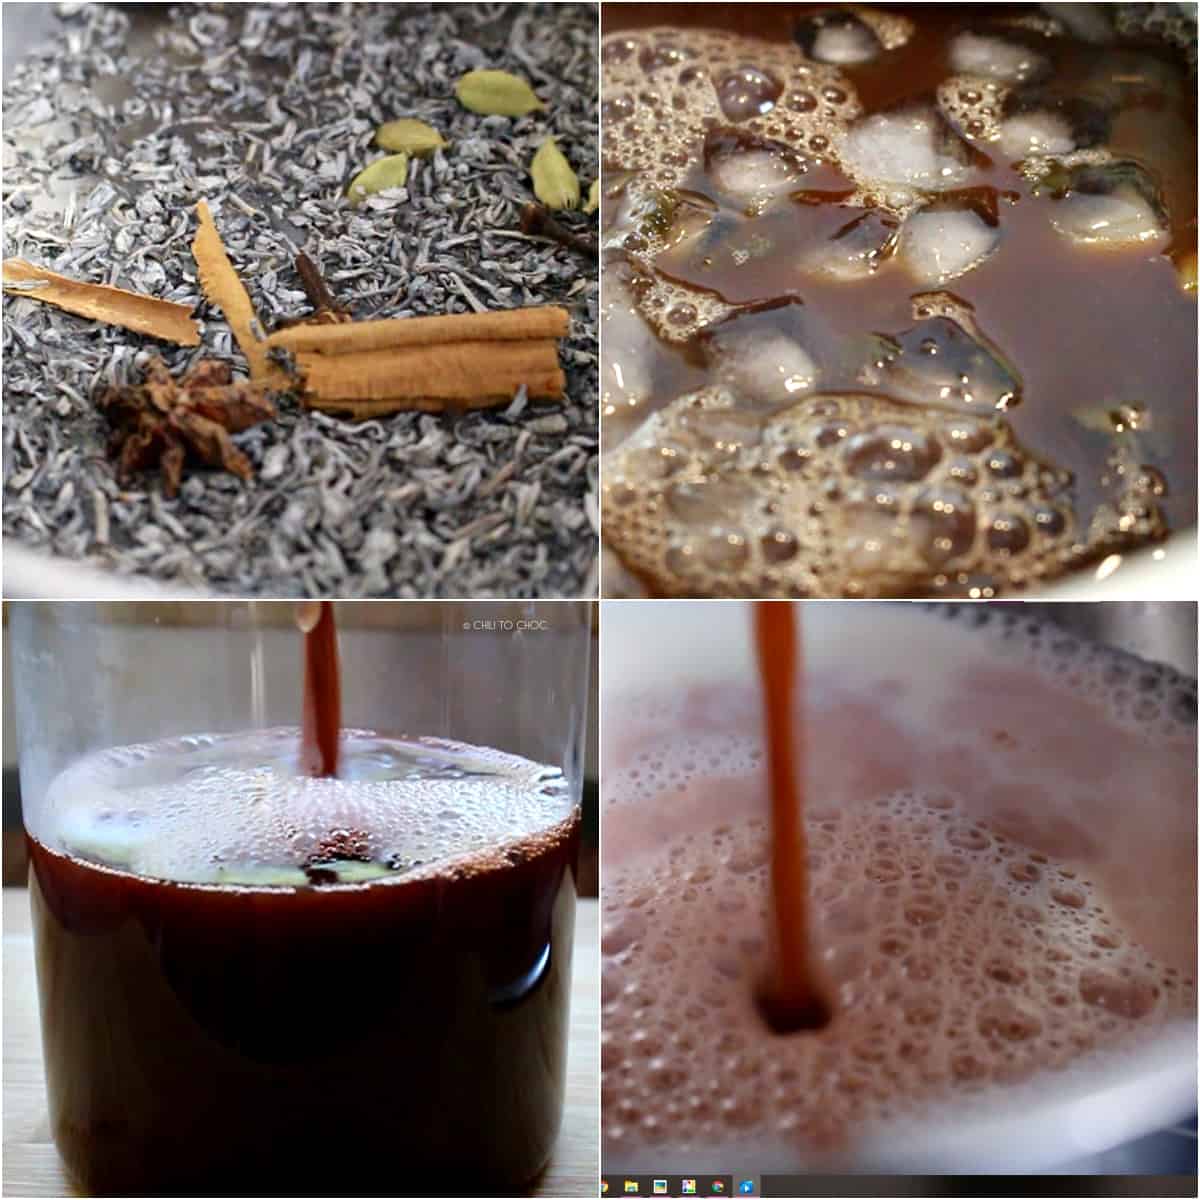 Step by step photos of the making of Kashmiri Chai